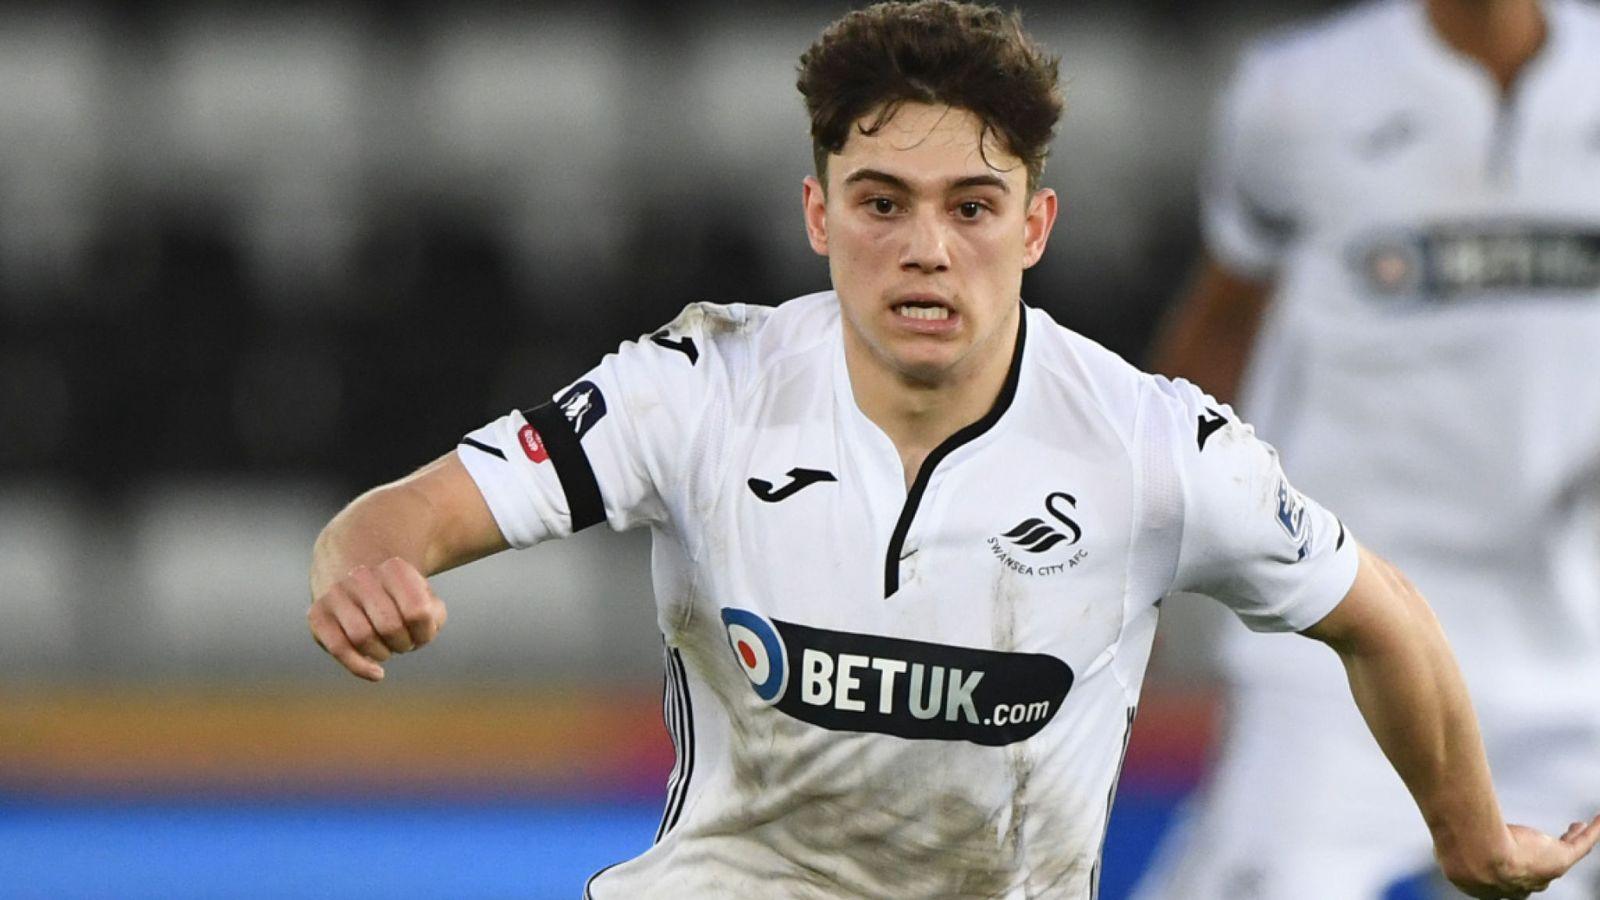 Manchester United to close agreeing Daniel James deal from Swansea